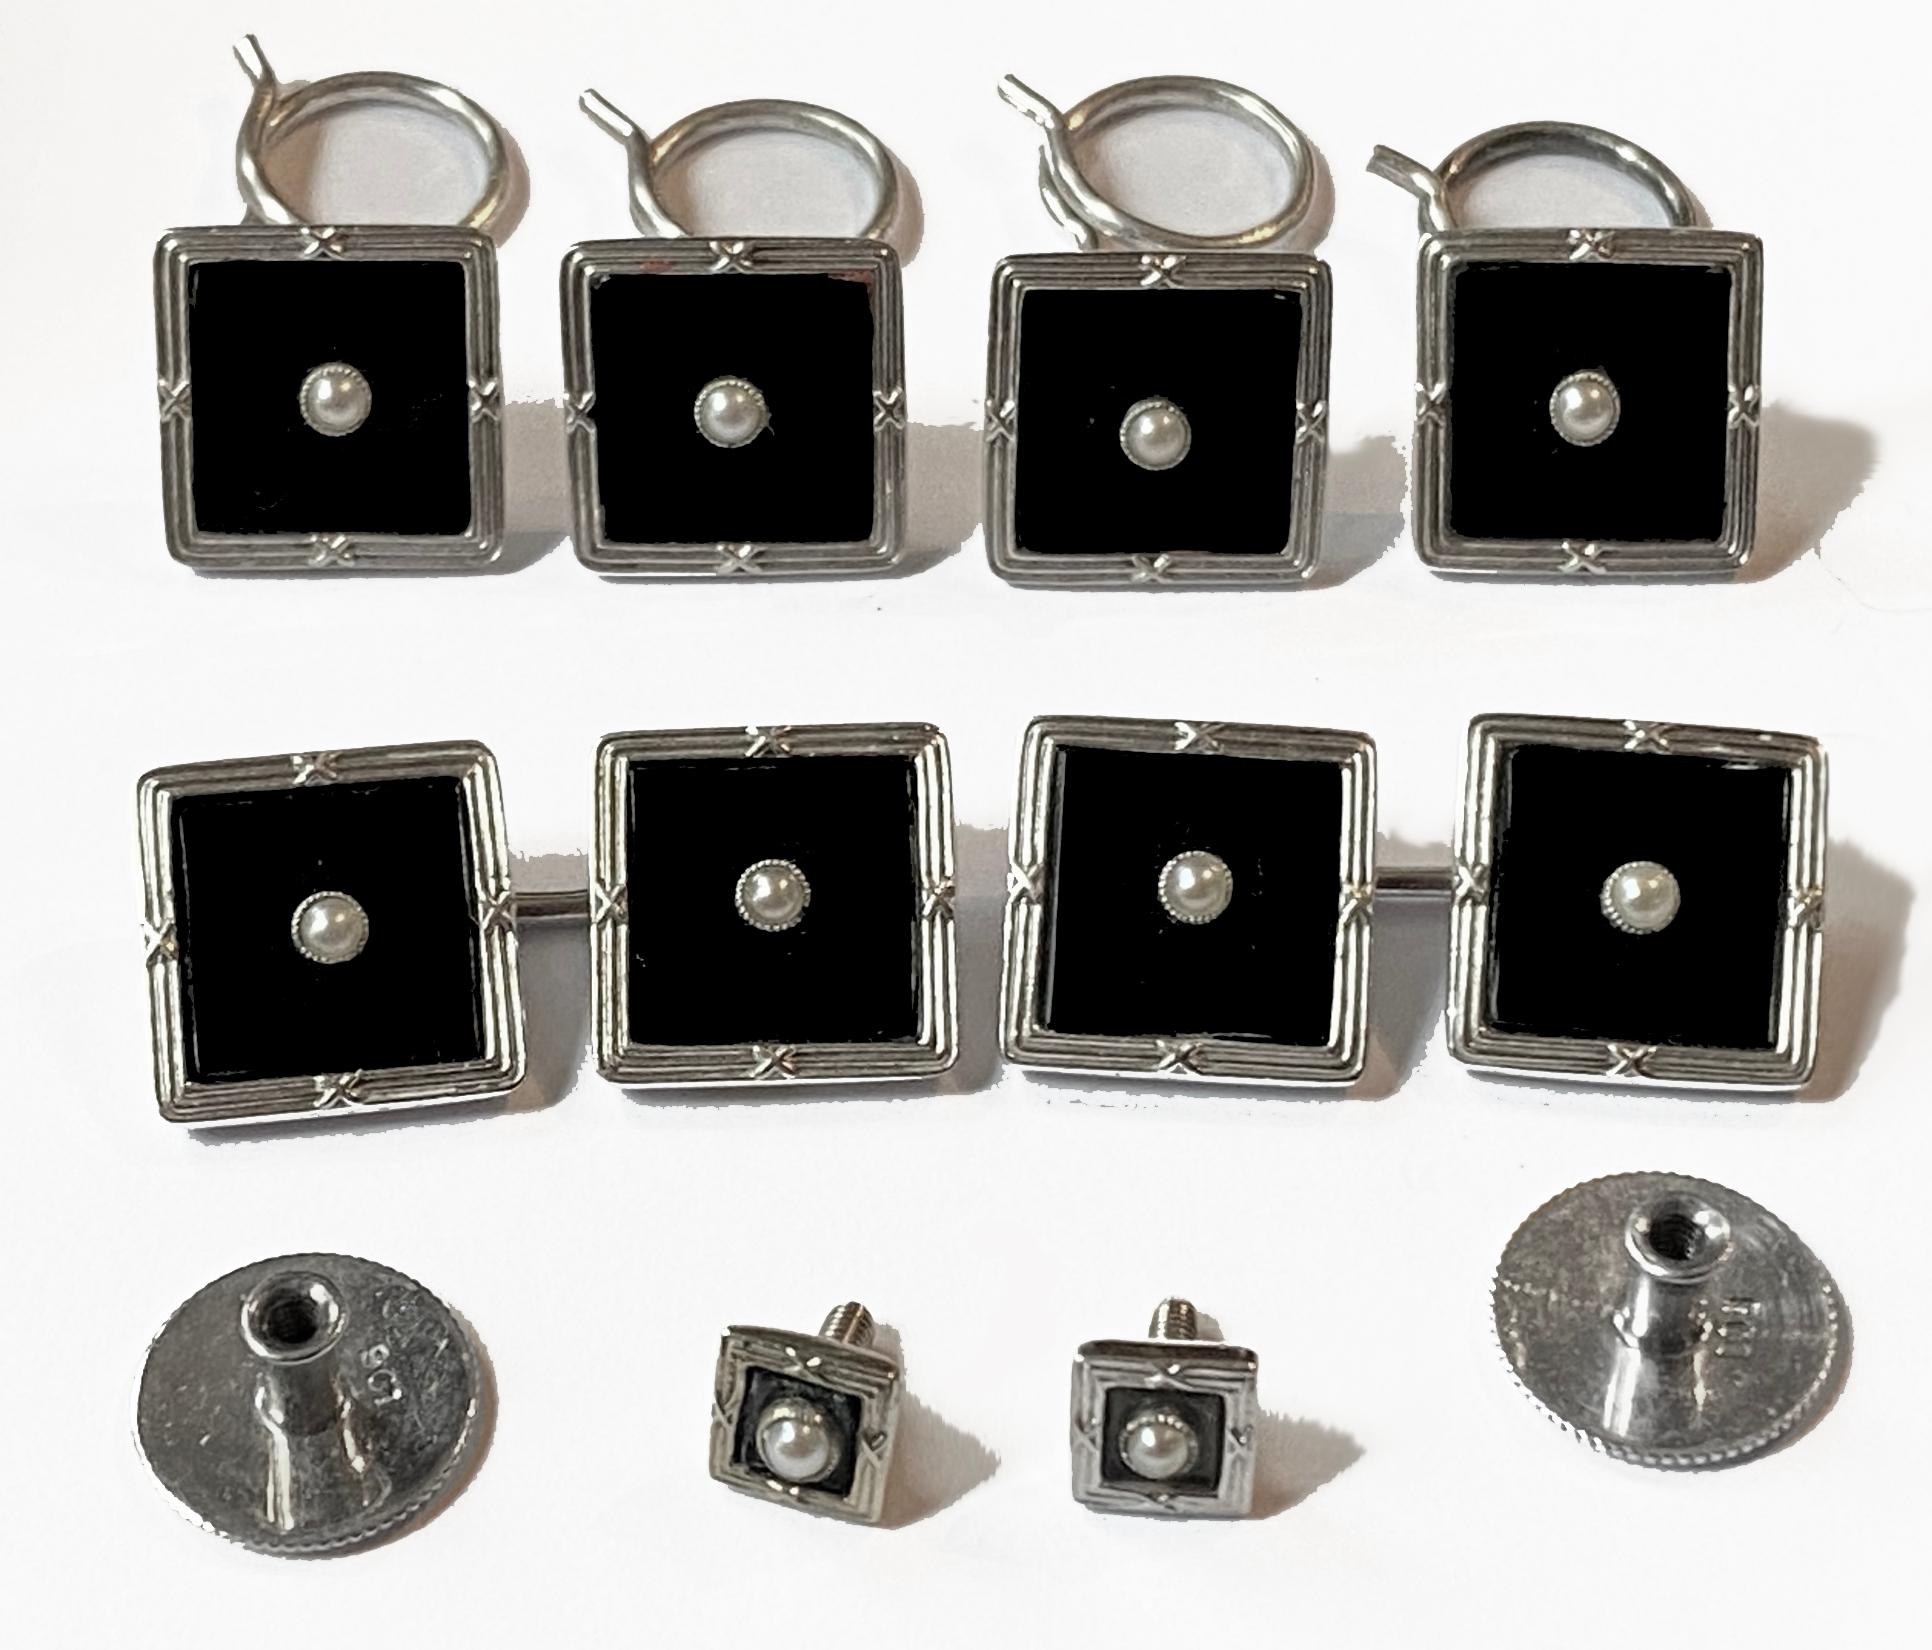 Art Deco Onyx and 9ct white gold Cufflinks Studs Tuxedo Set in fitted box, English C.1920. The studs of square shape, black onyx centre, gold surround, the centre of each with a small pearl. The Cufflinks with link between, collar studs set with